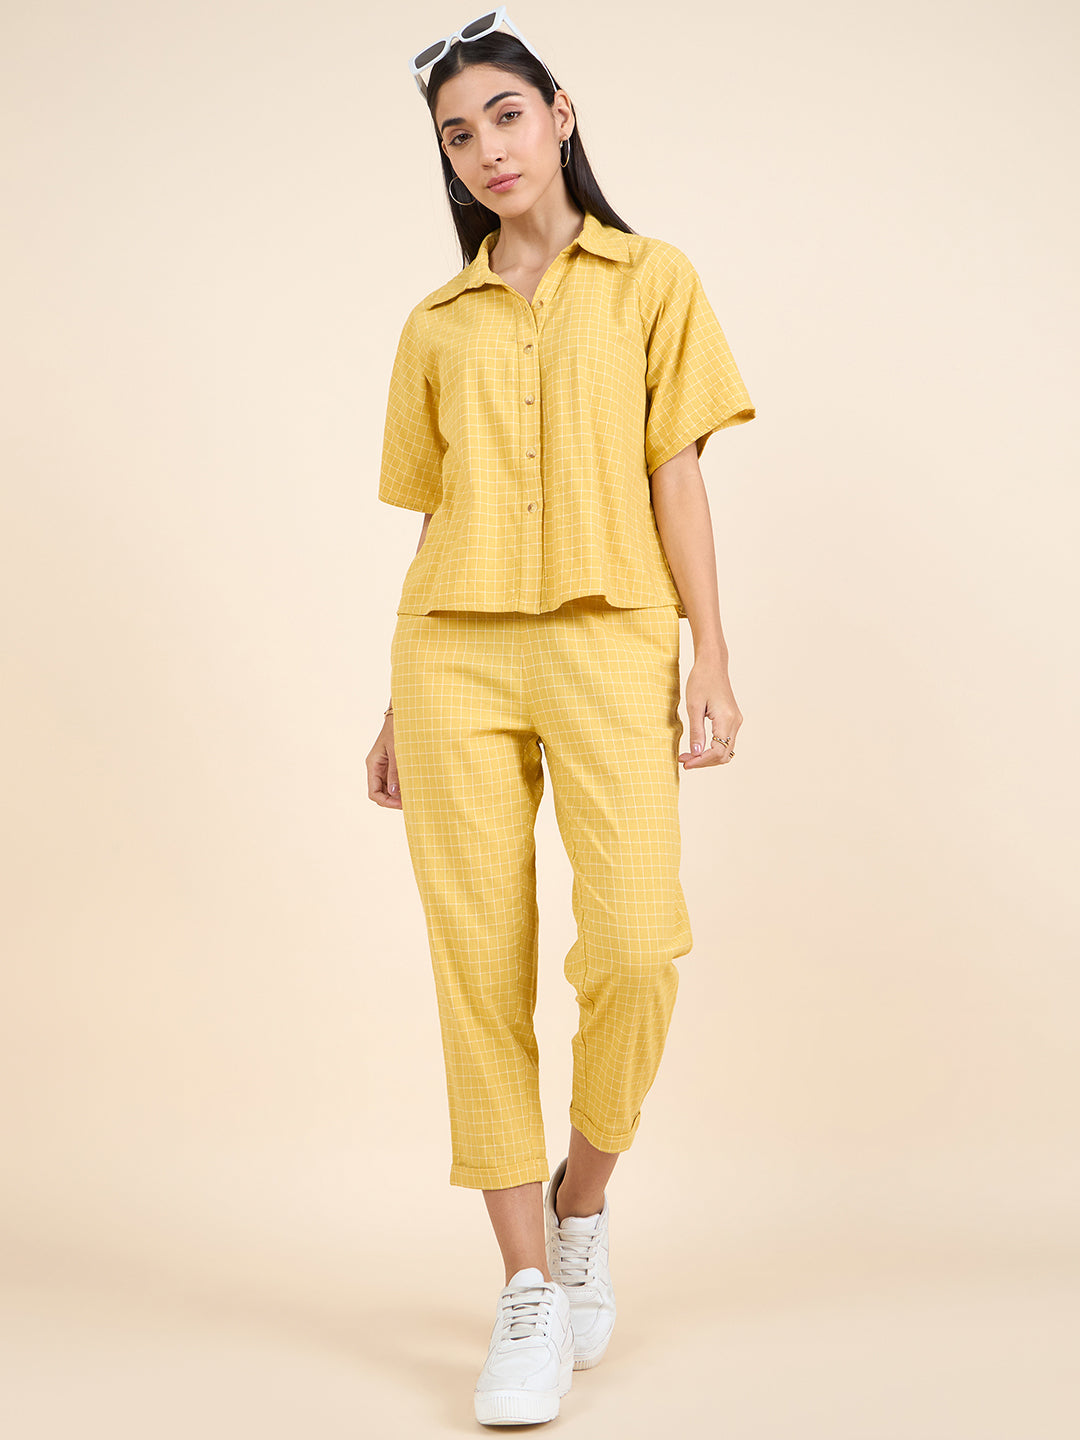 Gipsy Stylish Women co-ord set Summer Collection Yellow